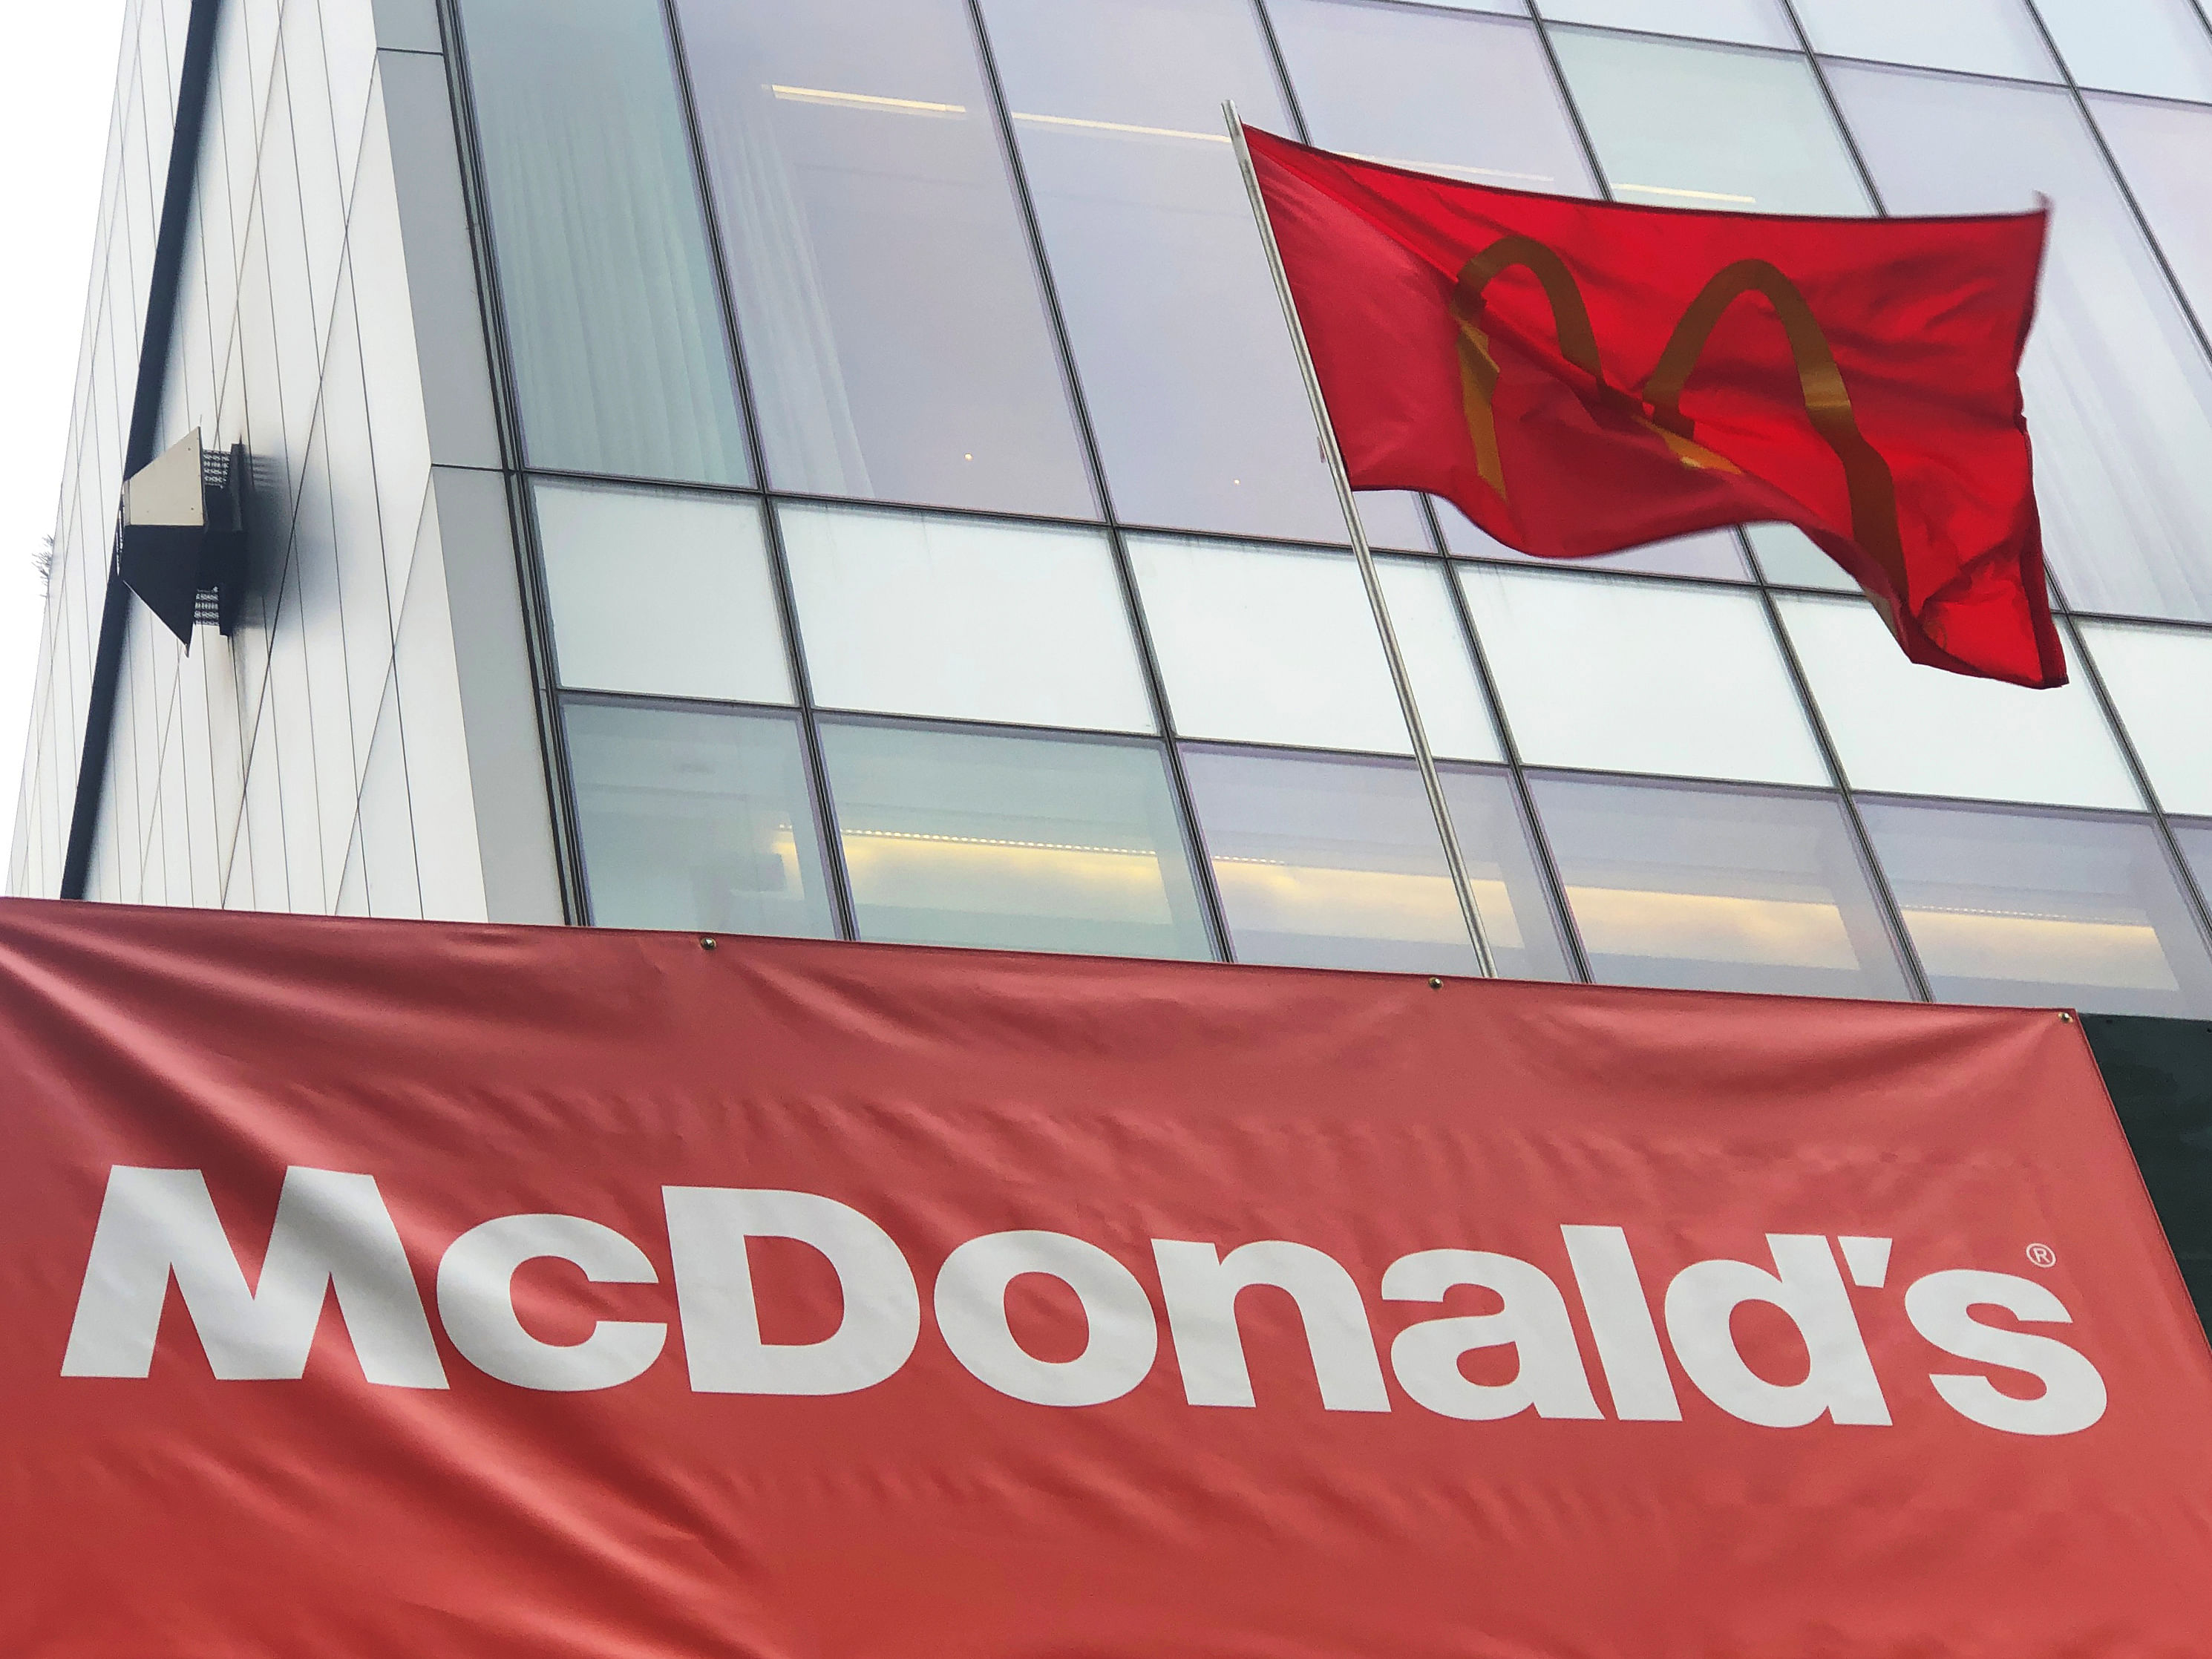 A McDonald's banner and flag are seen outside the fast-food chain McDonald's in New York, US. (Reuters Photo)